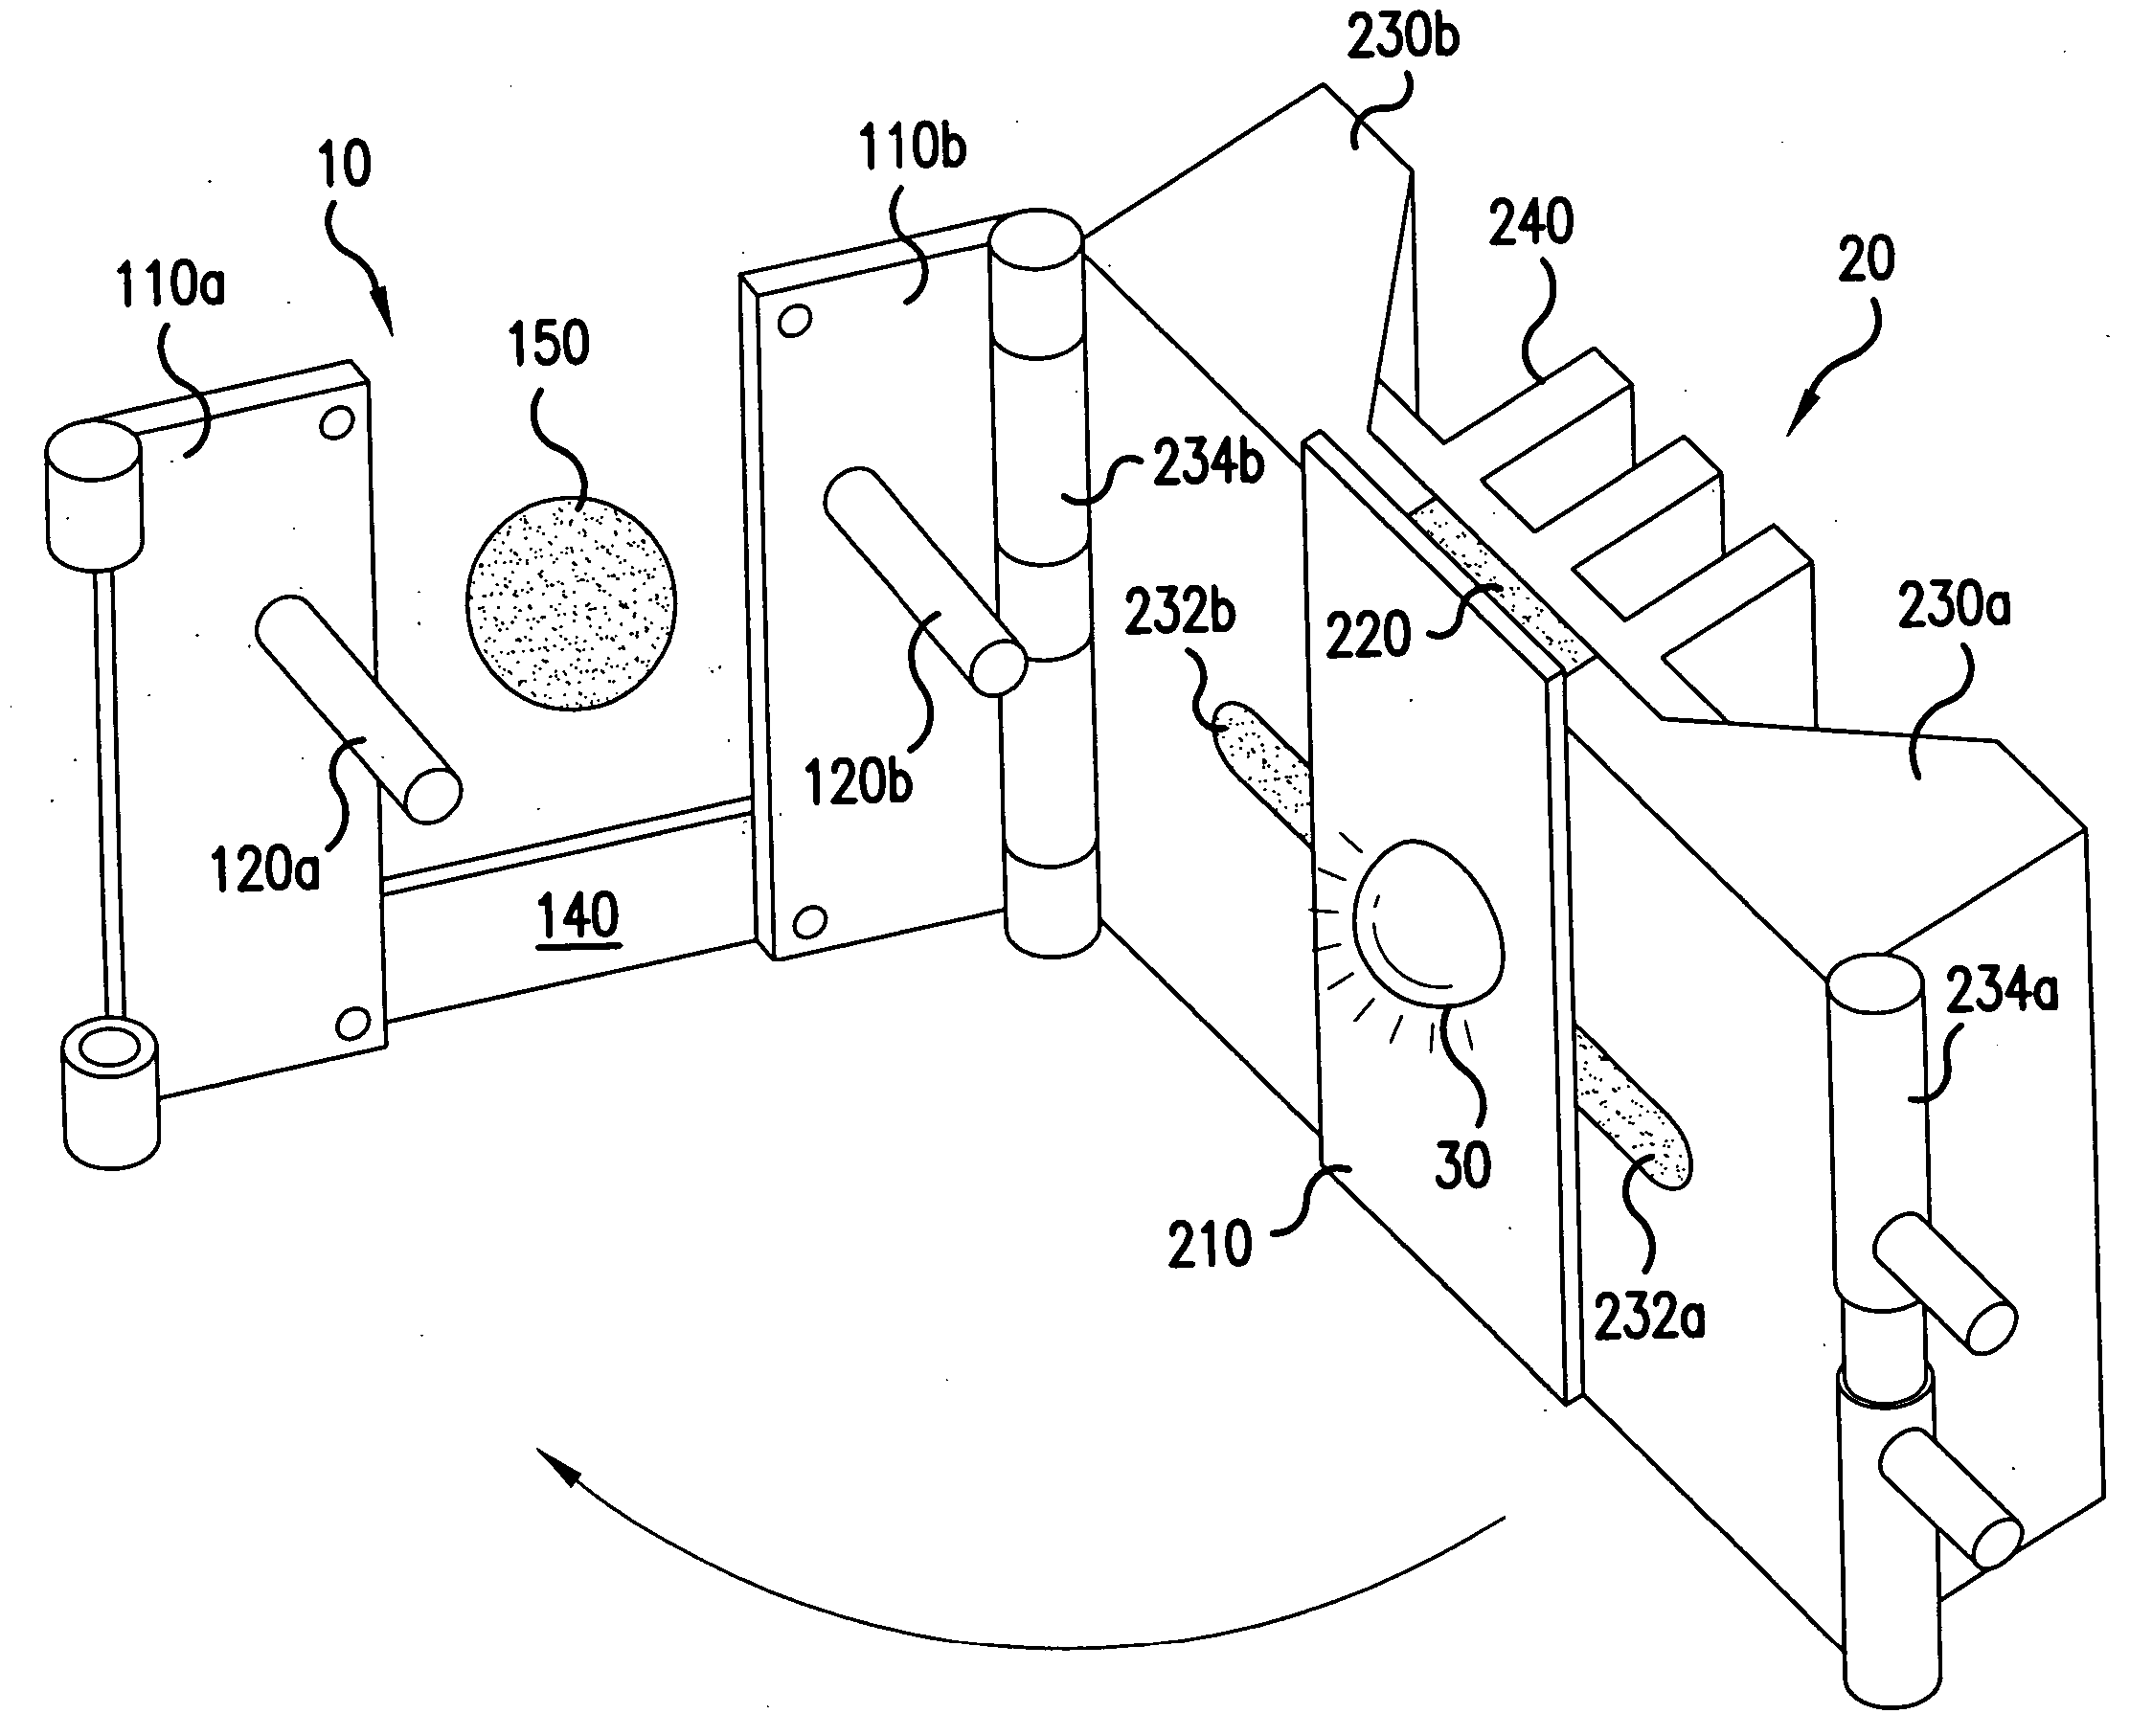 Quick attachment fixture and power card for diode-based light devices